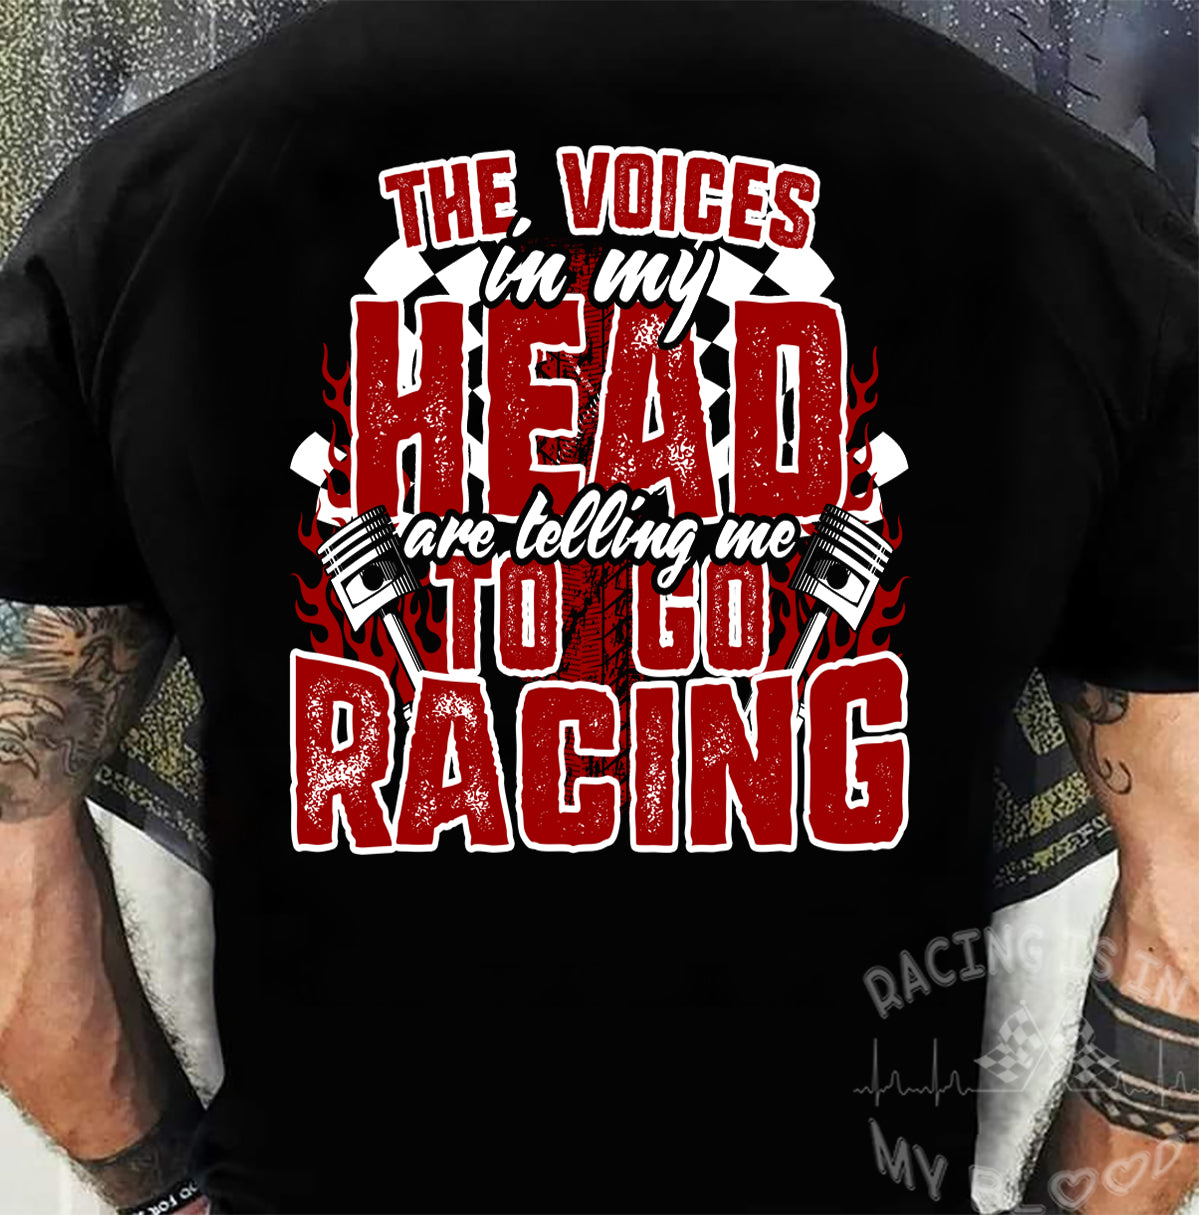 The Voices In My Head Are Telling Me To go Racing T-Shirts!